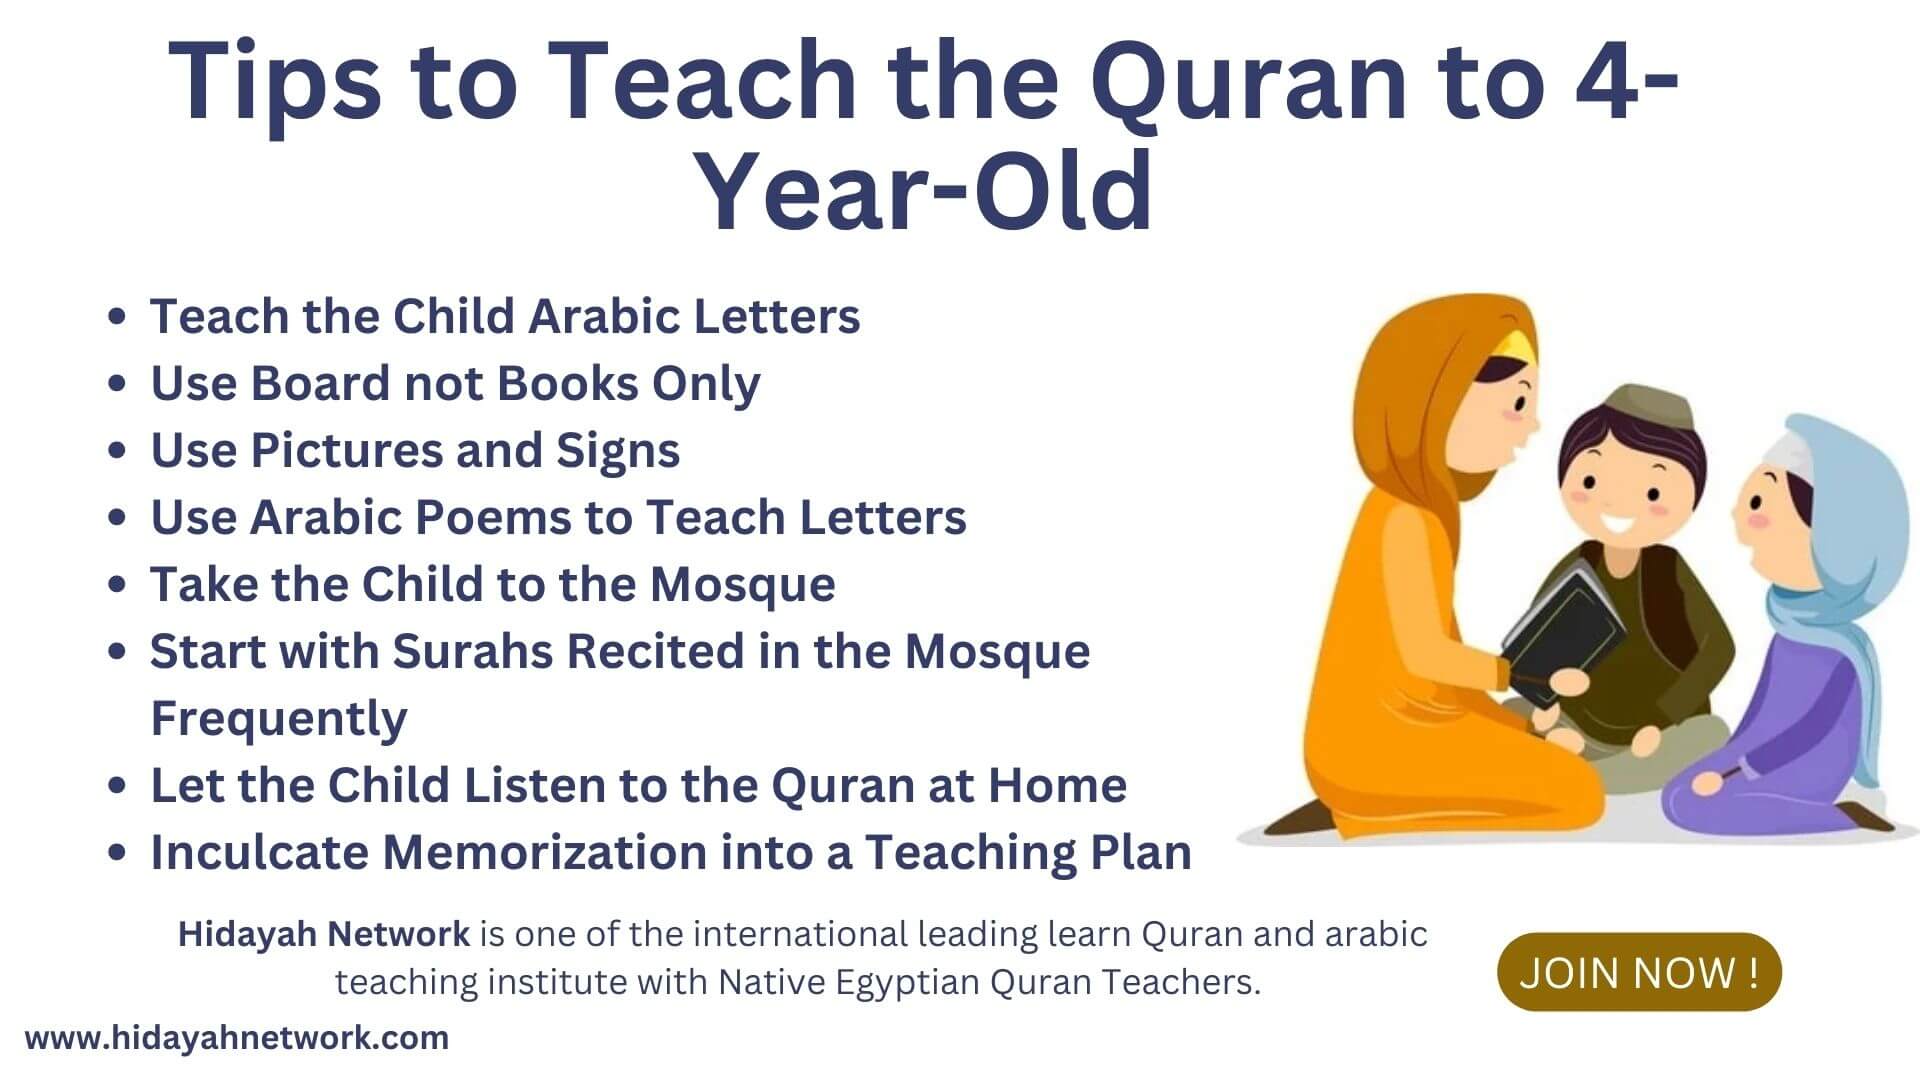 Tips to Teach the Quran to 4-Year-Old